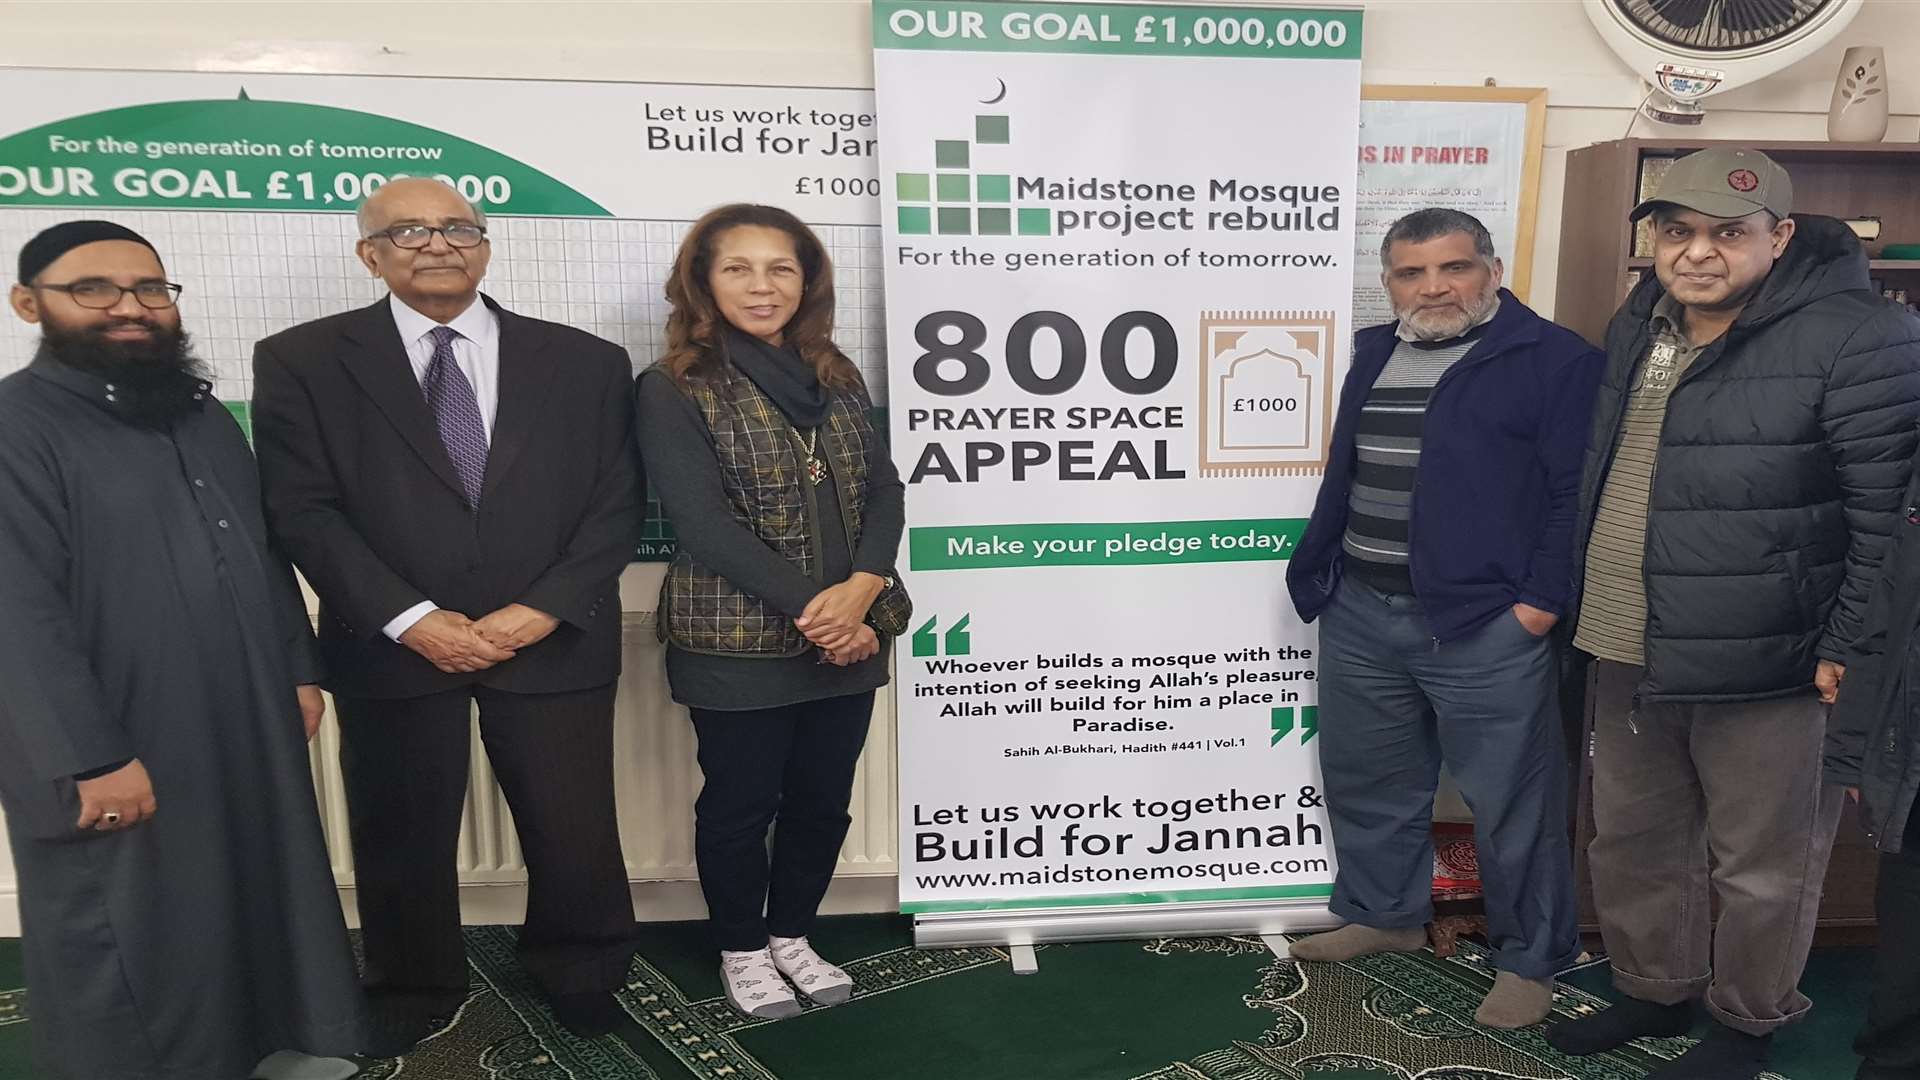 Helen Grant visits Maidstone Mosque as fundraising for a new facility takes a step forward.